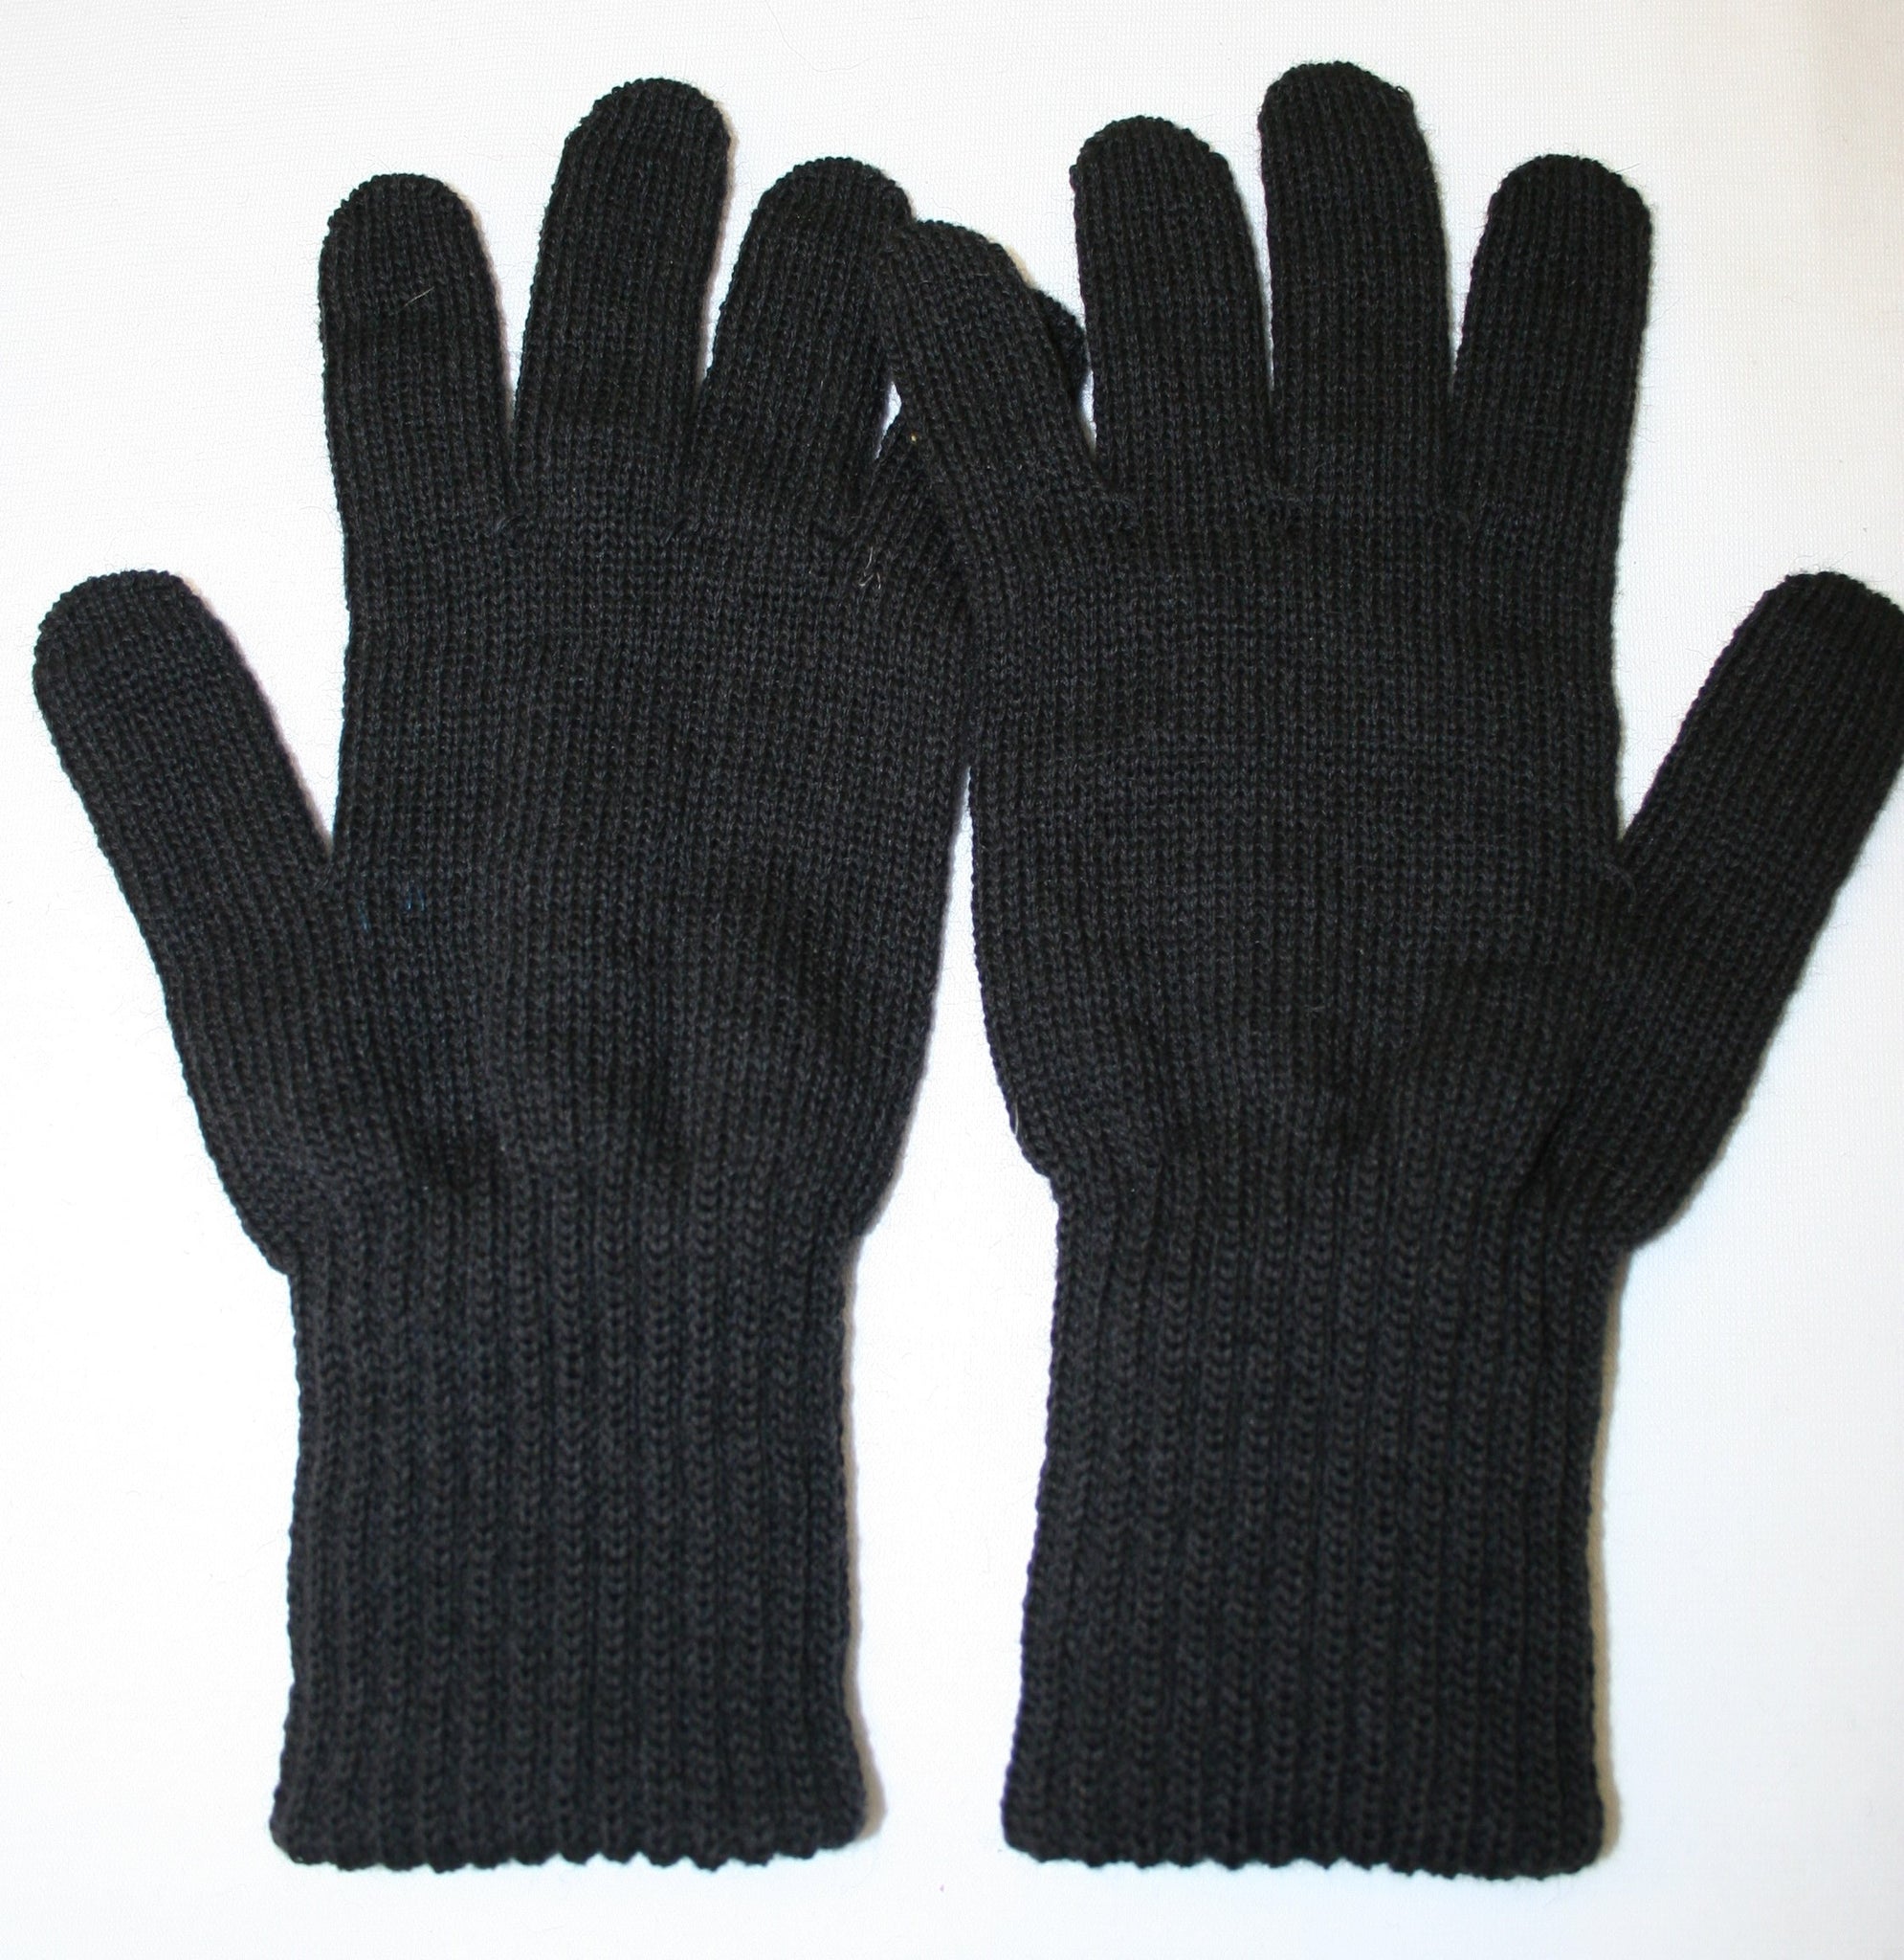 100% Wool Seamless Gloves - Save Up To 